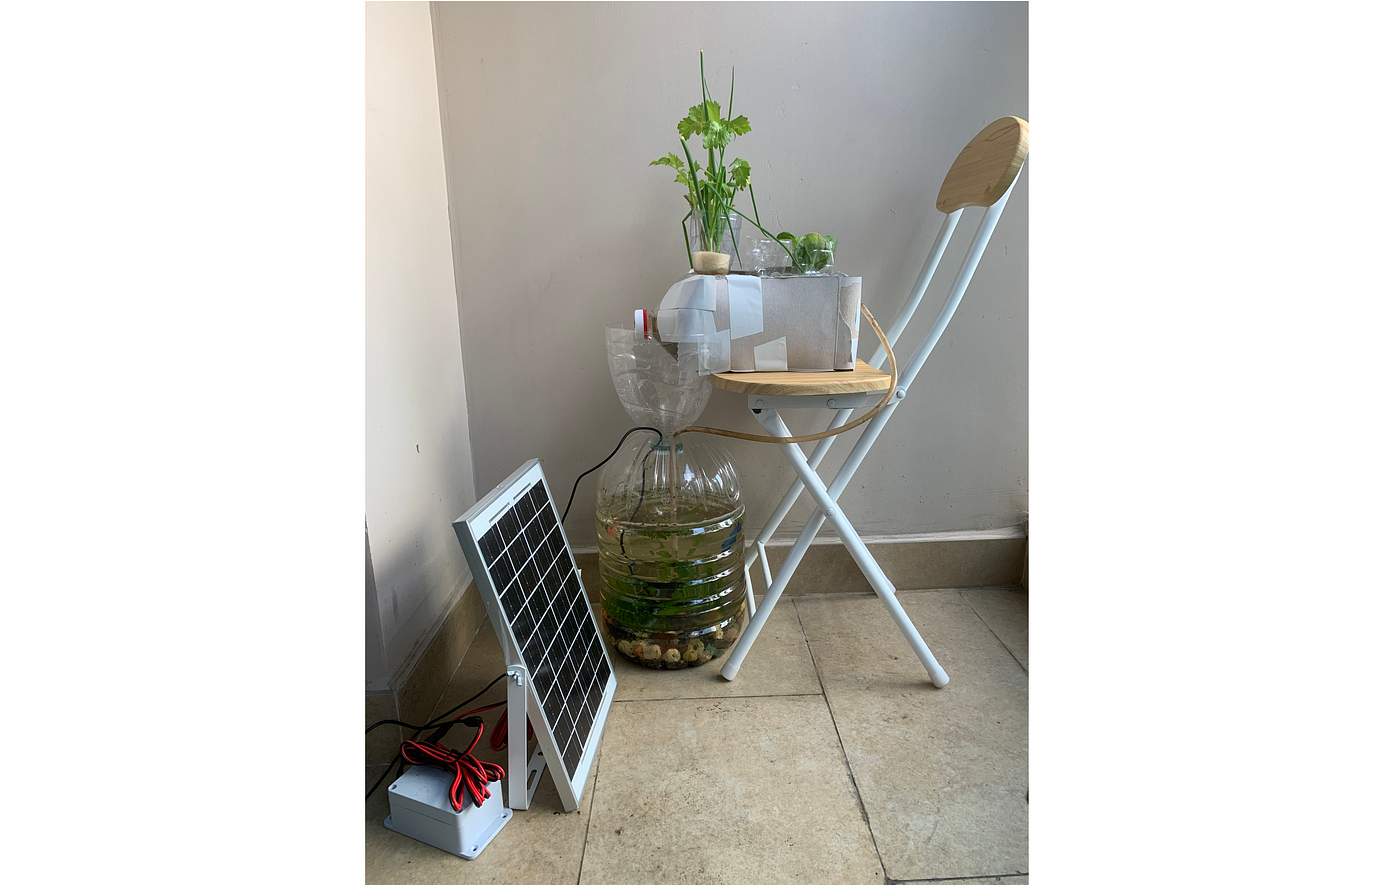 How to Build a Solar Aquaponic System with Plastic Bottles, by Sixing  Huang, The DIY Diaries